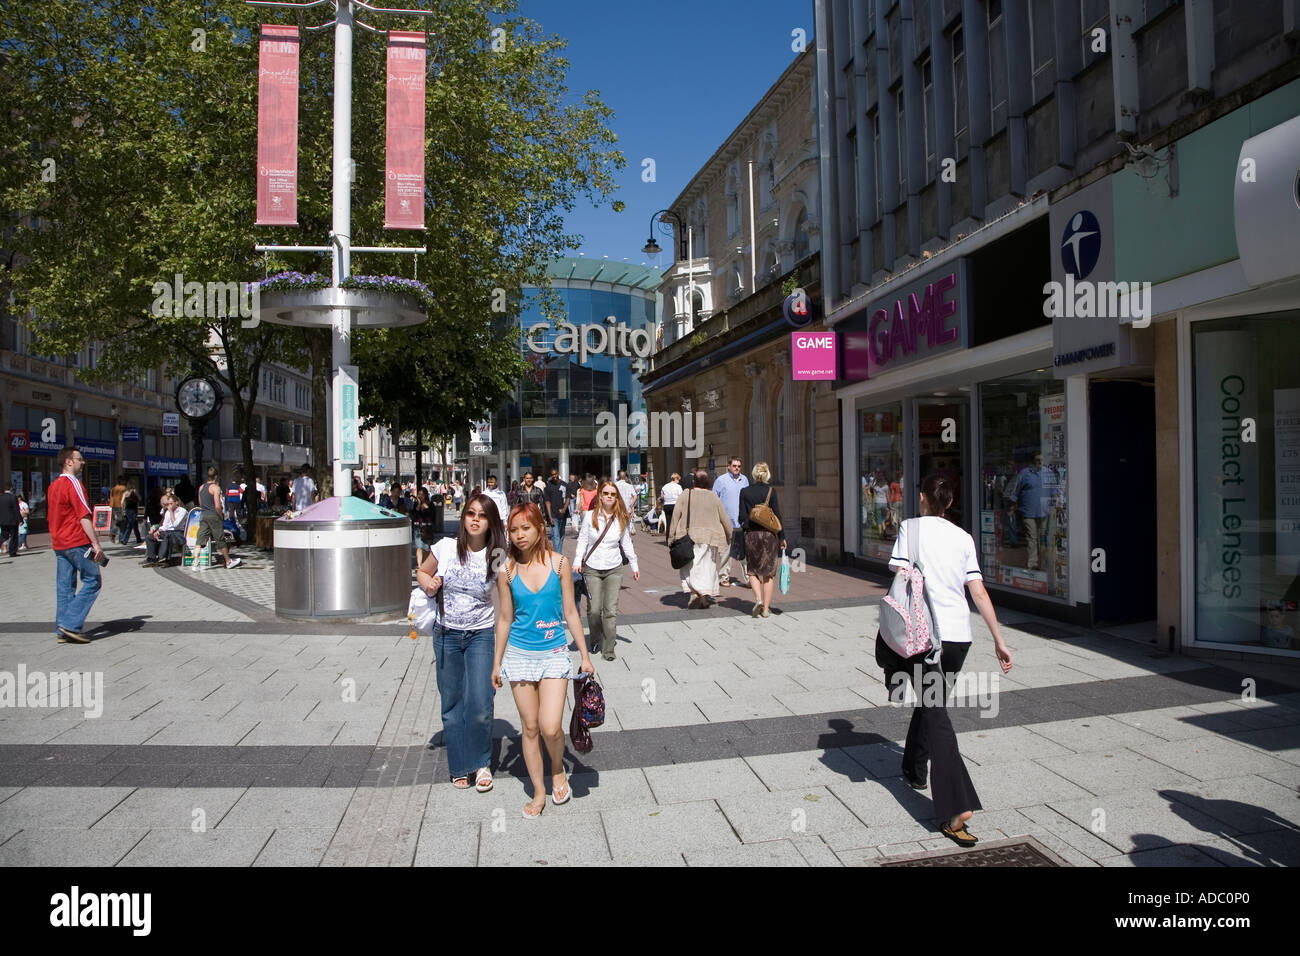 Girls in busy shopping pedestrian area Cardiff Wales UK Stock Photo